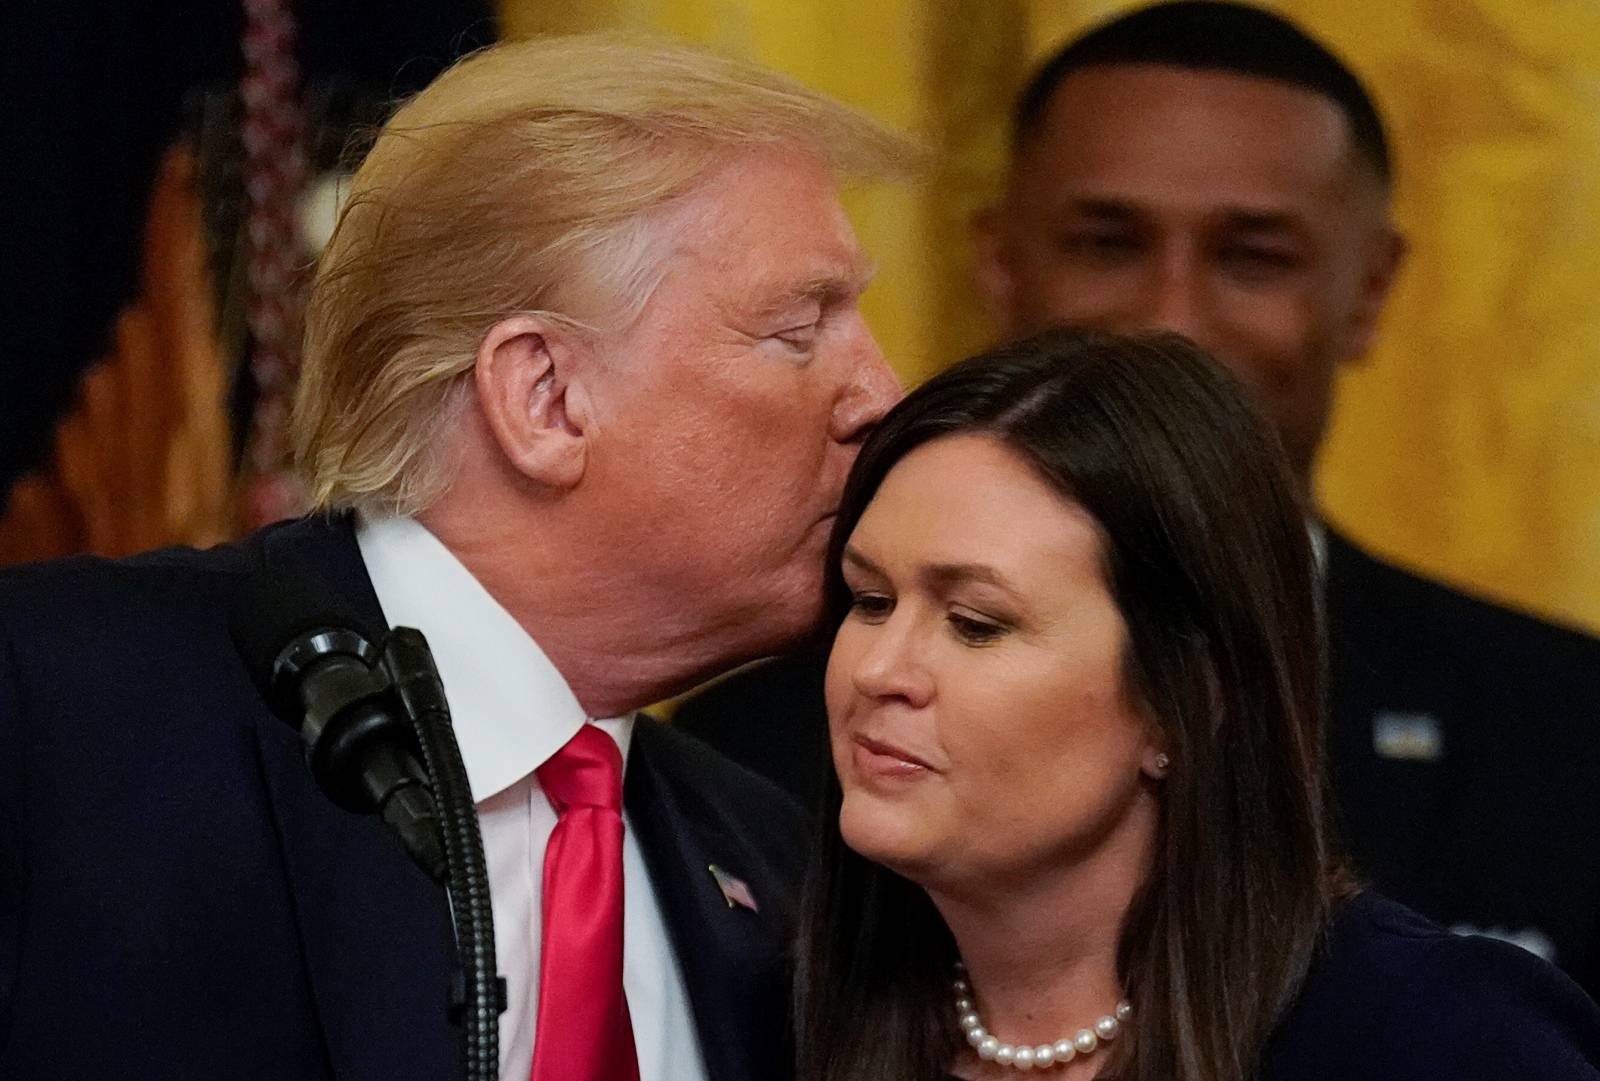 U.S. President Trump kisses press secretary Sanders during "second chance hiring" prisoner reentry event at the White House in Washington